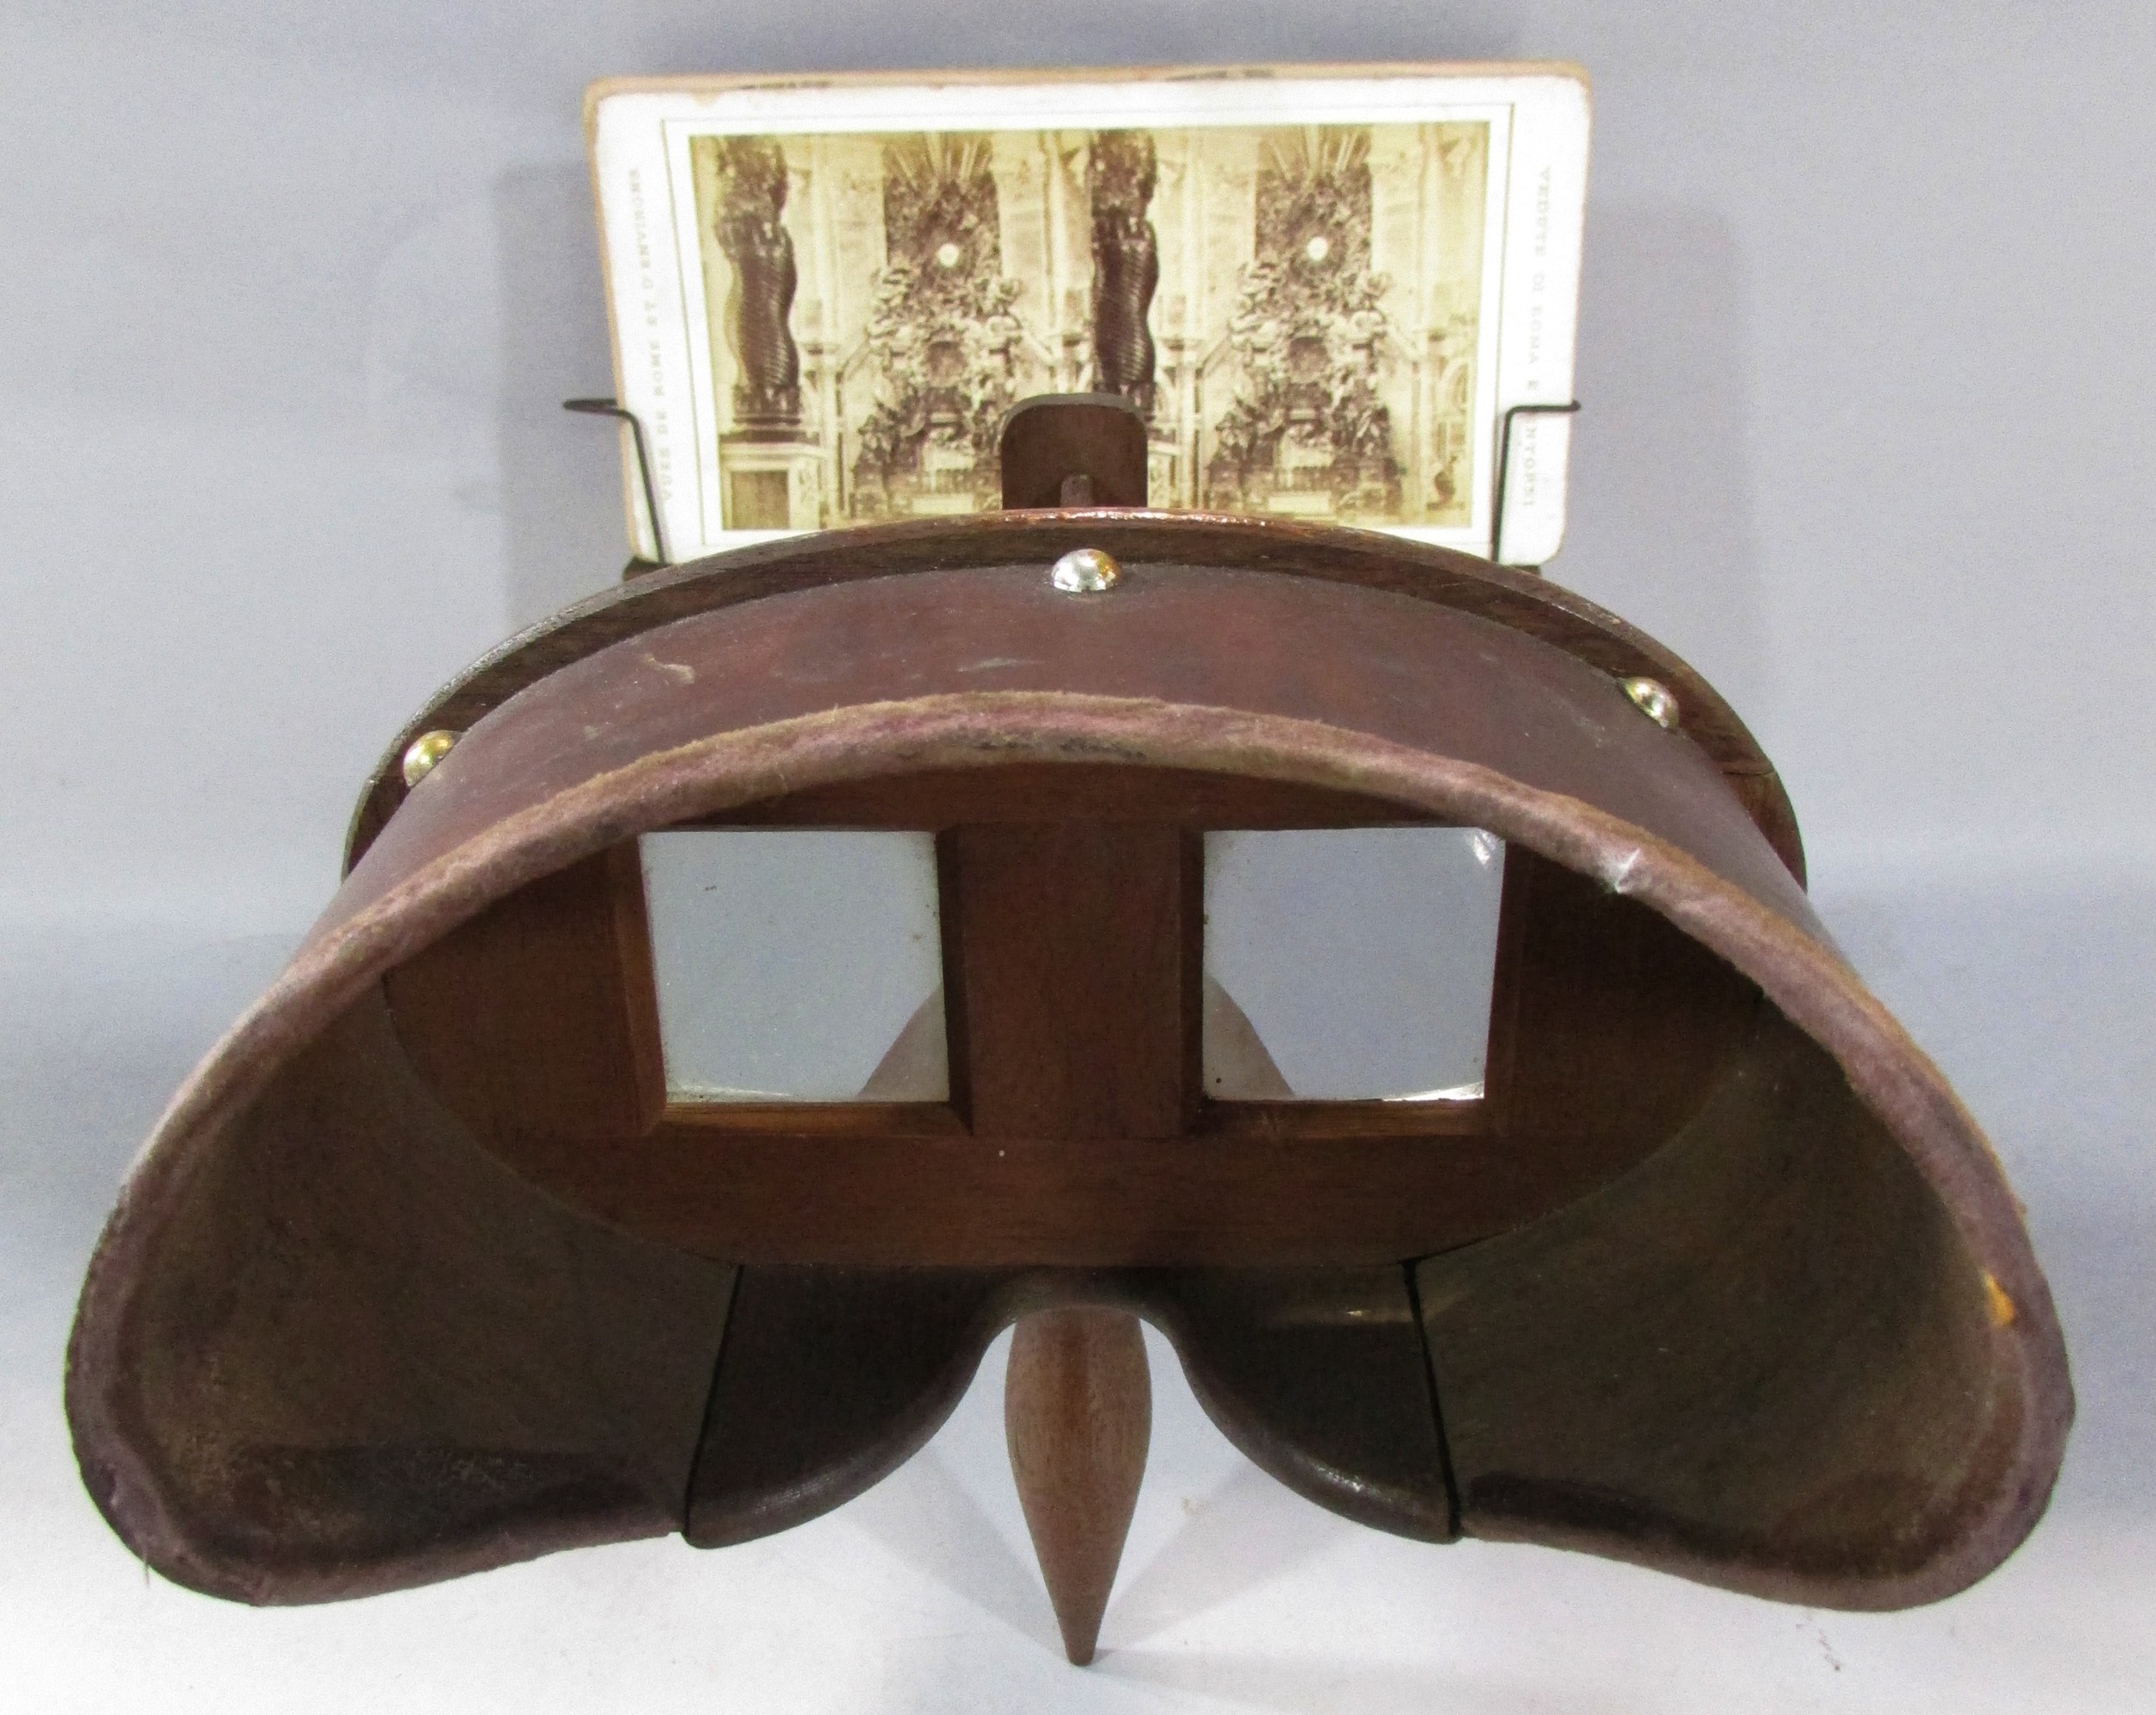 A Victorian Stereoscopic viewer, with a selection of topographical cards, rural landscapes, - Image 5 of 7